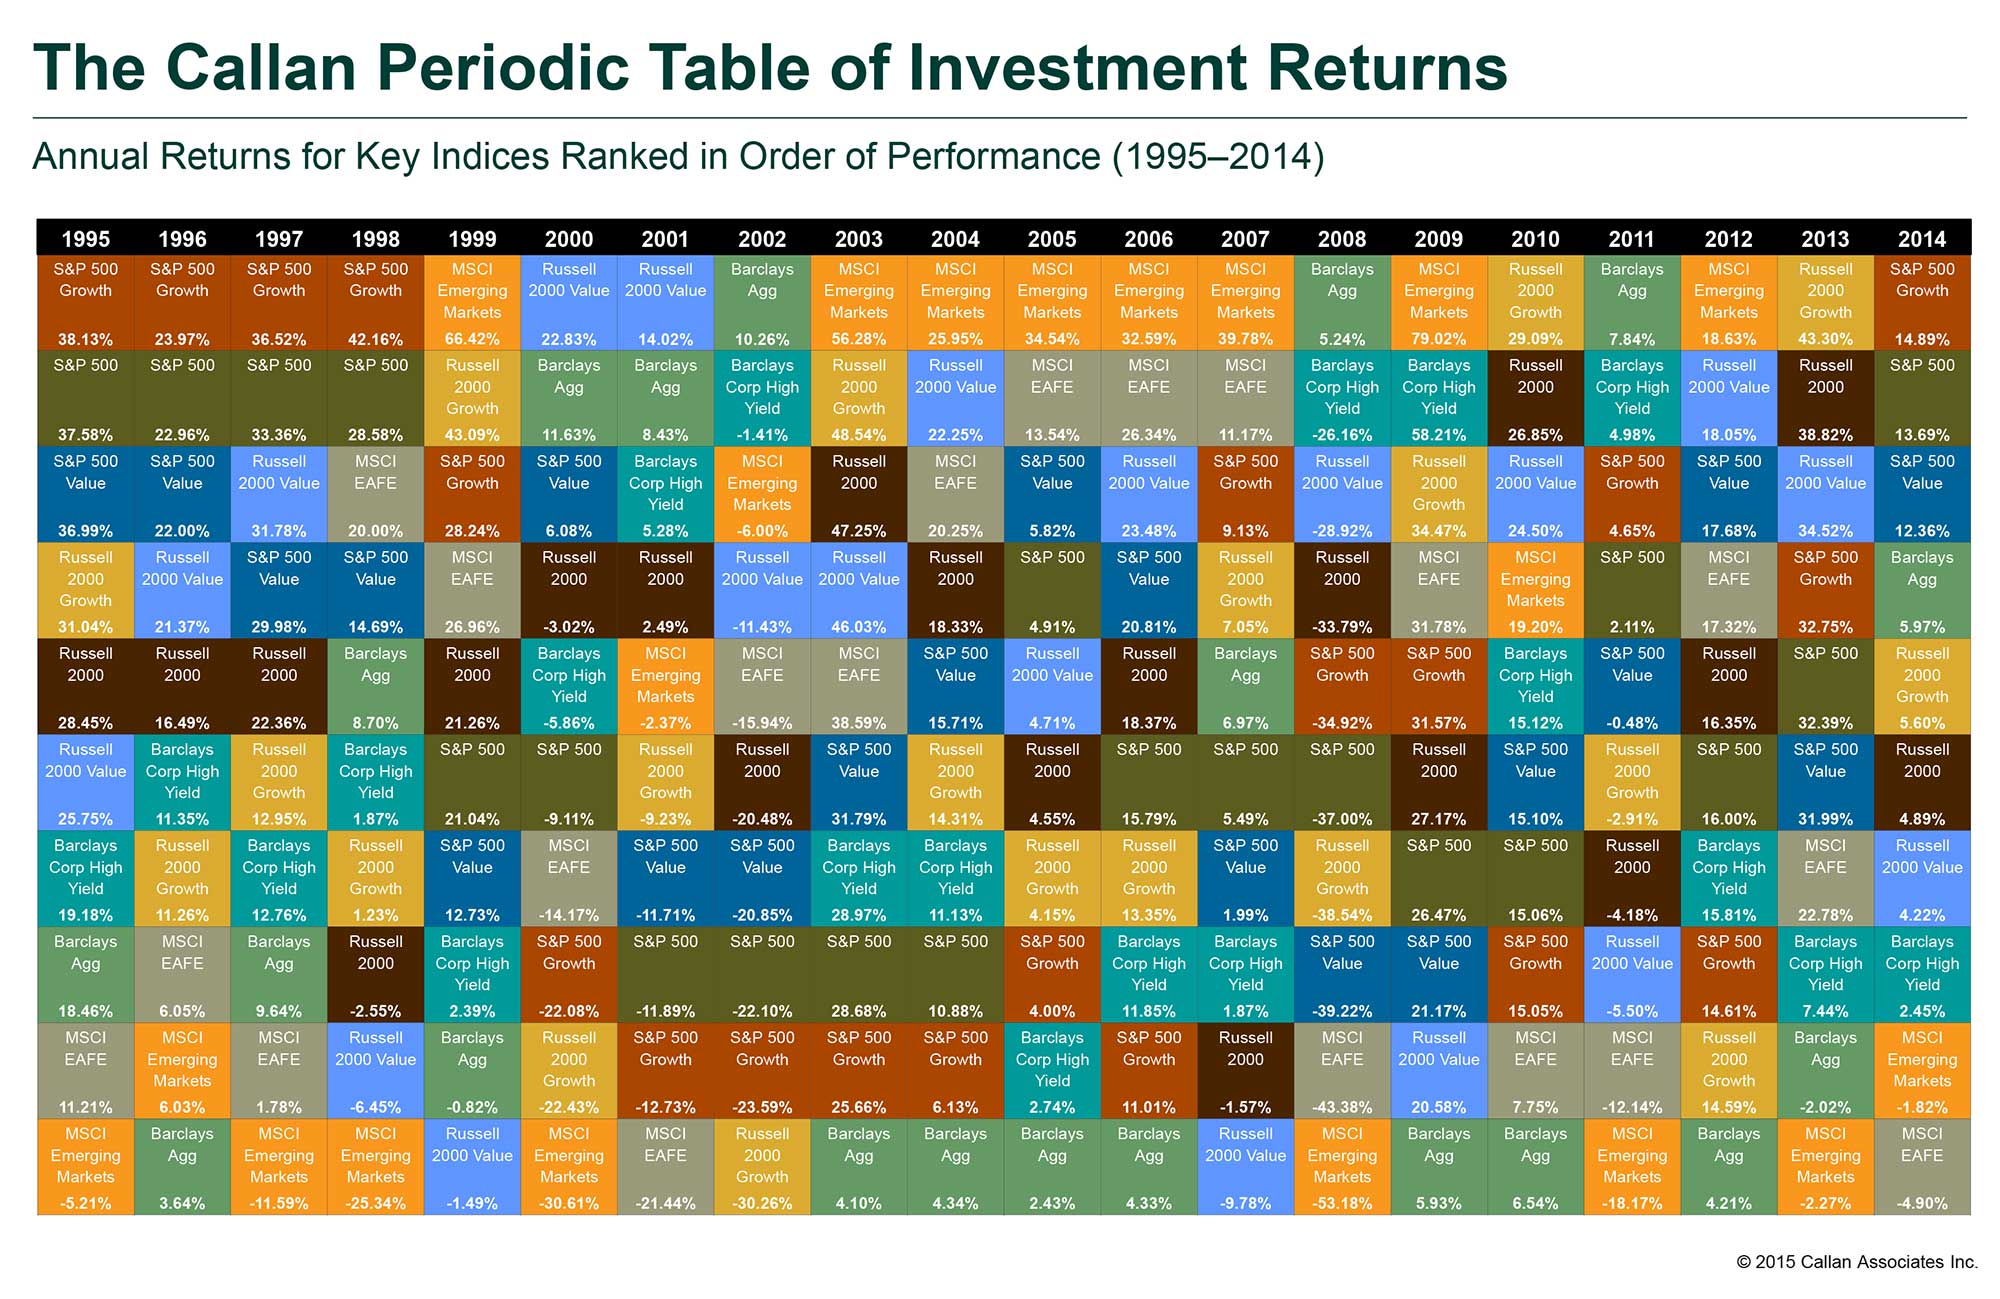 55f325891d099d2d3adff73e_the-callan-periodic-table-of-investment-returns